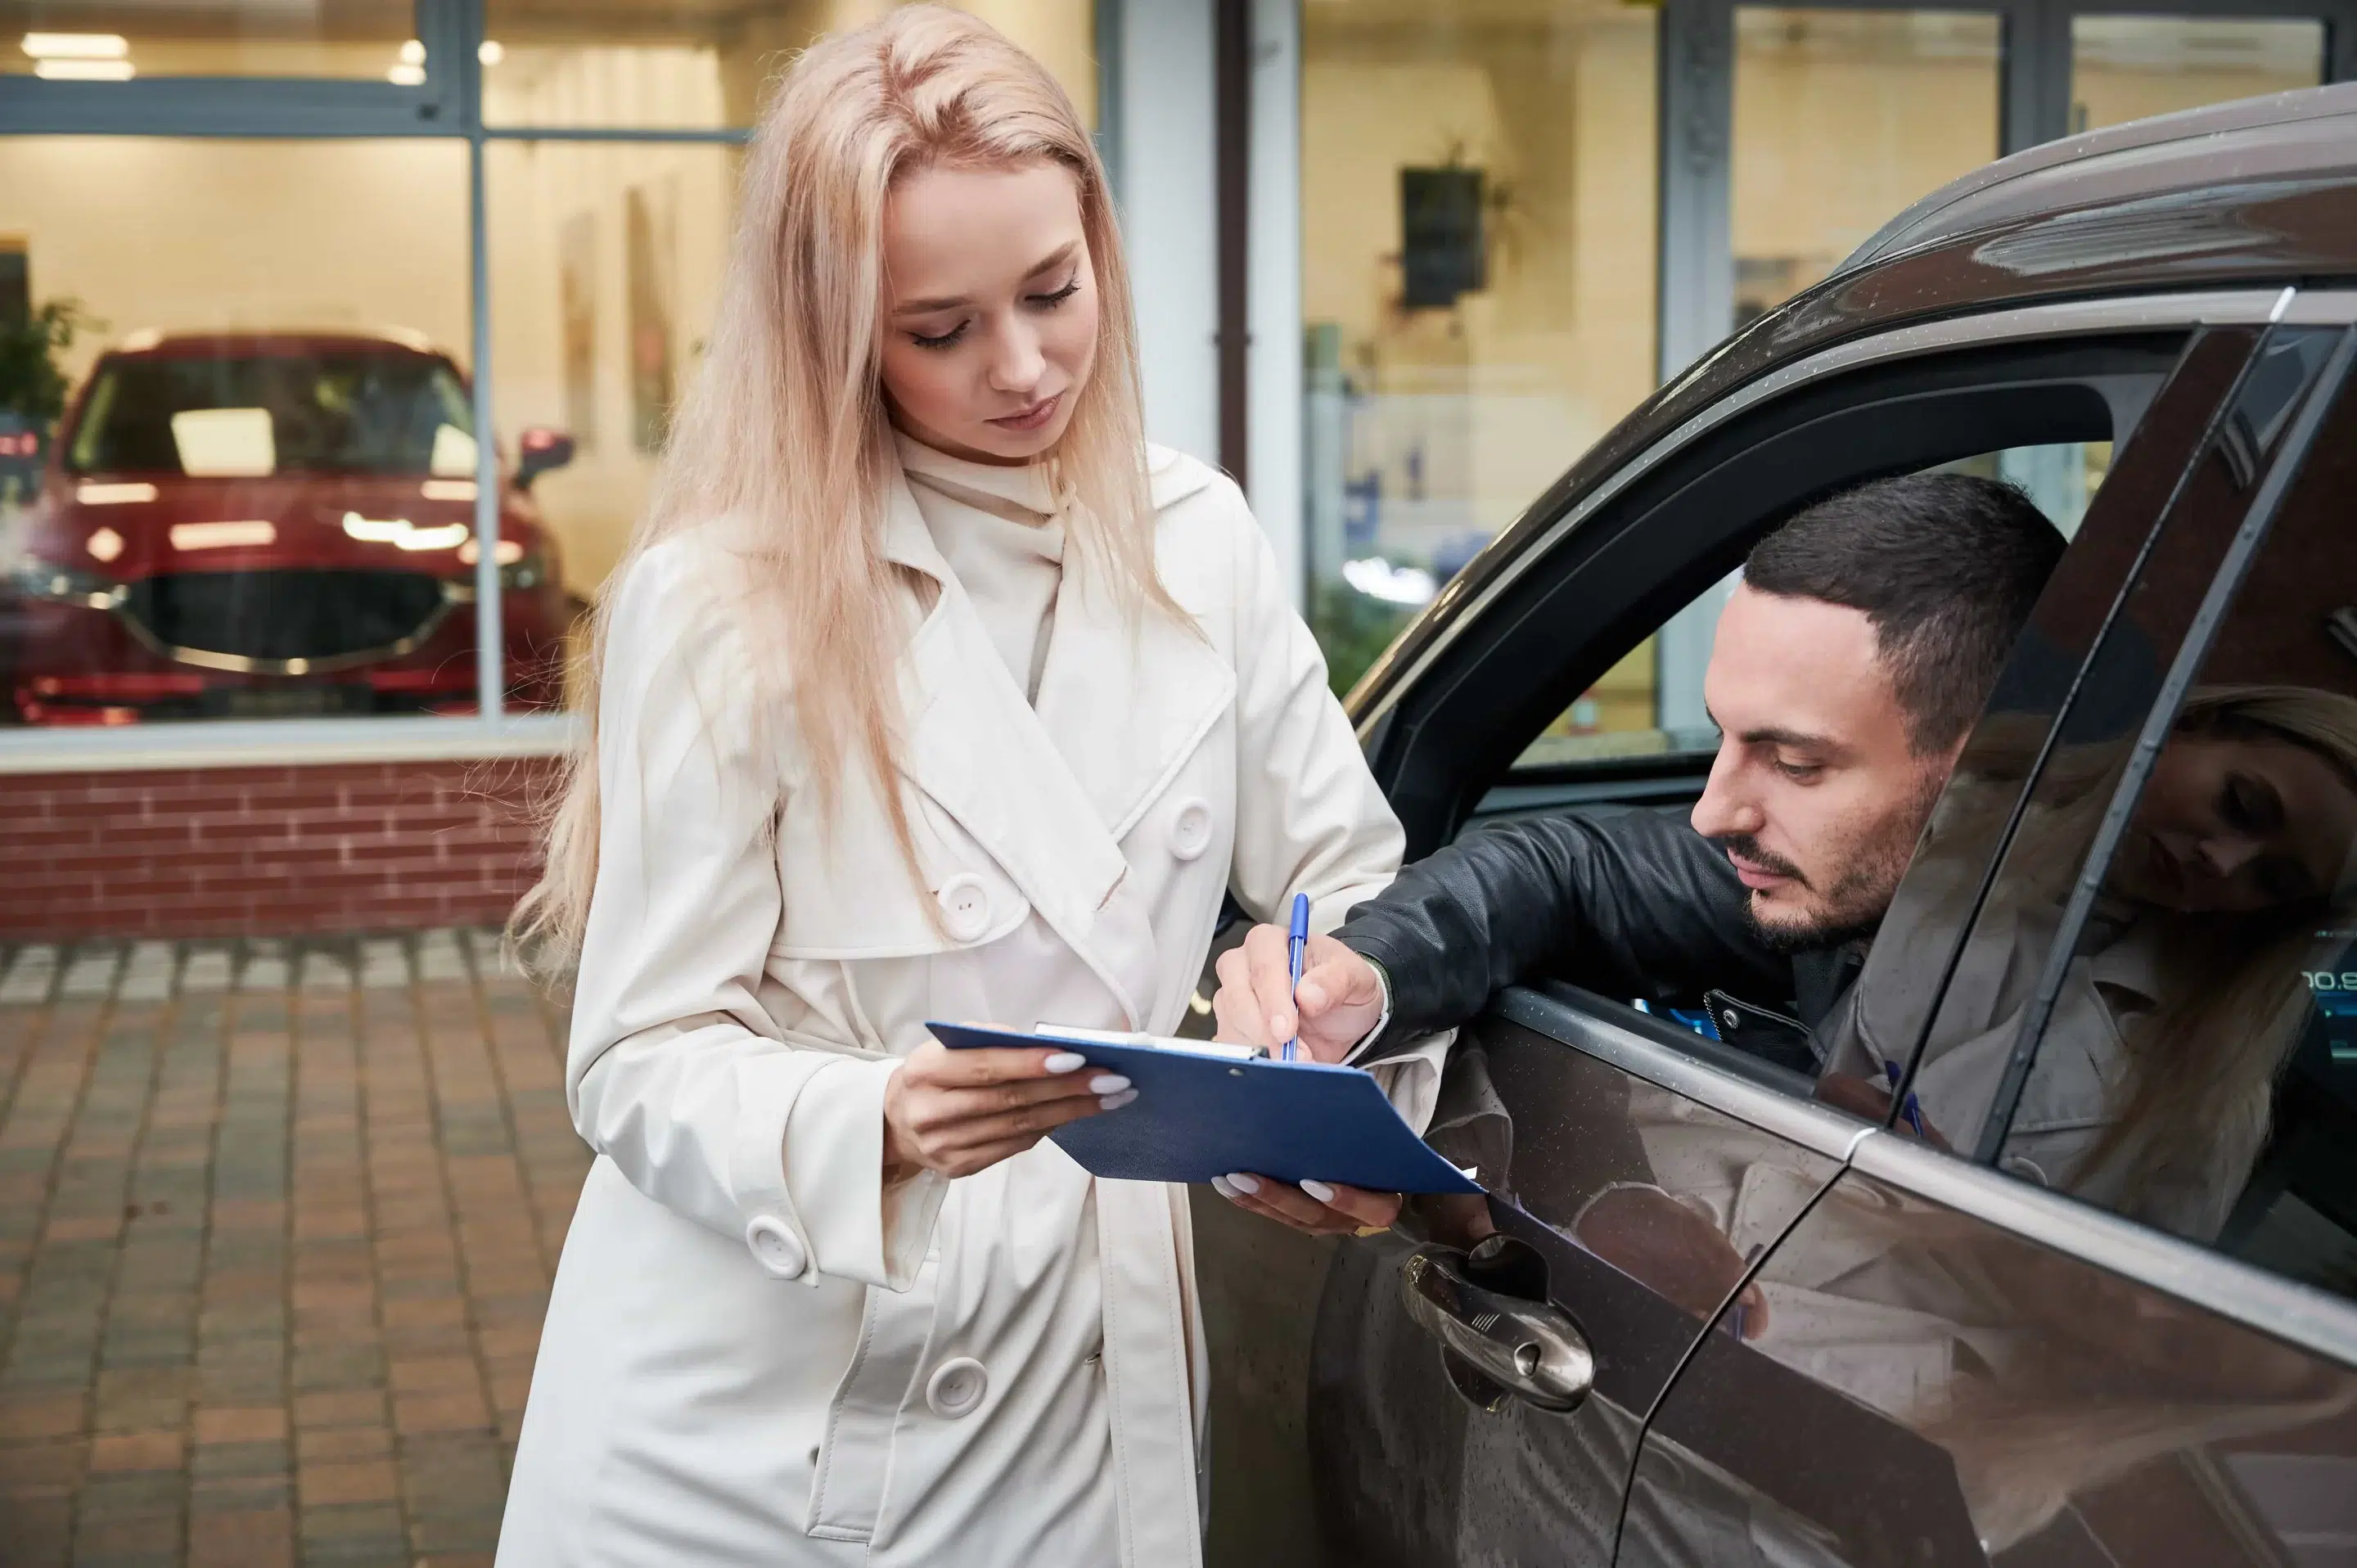 documents require to rent a car